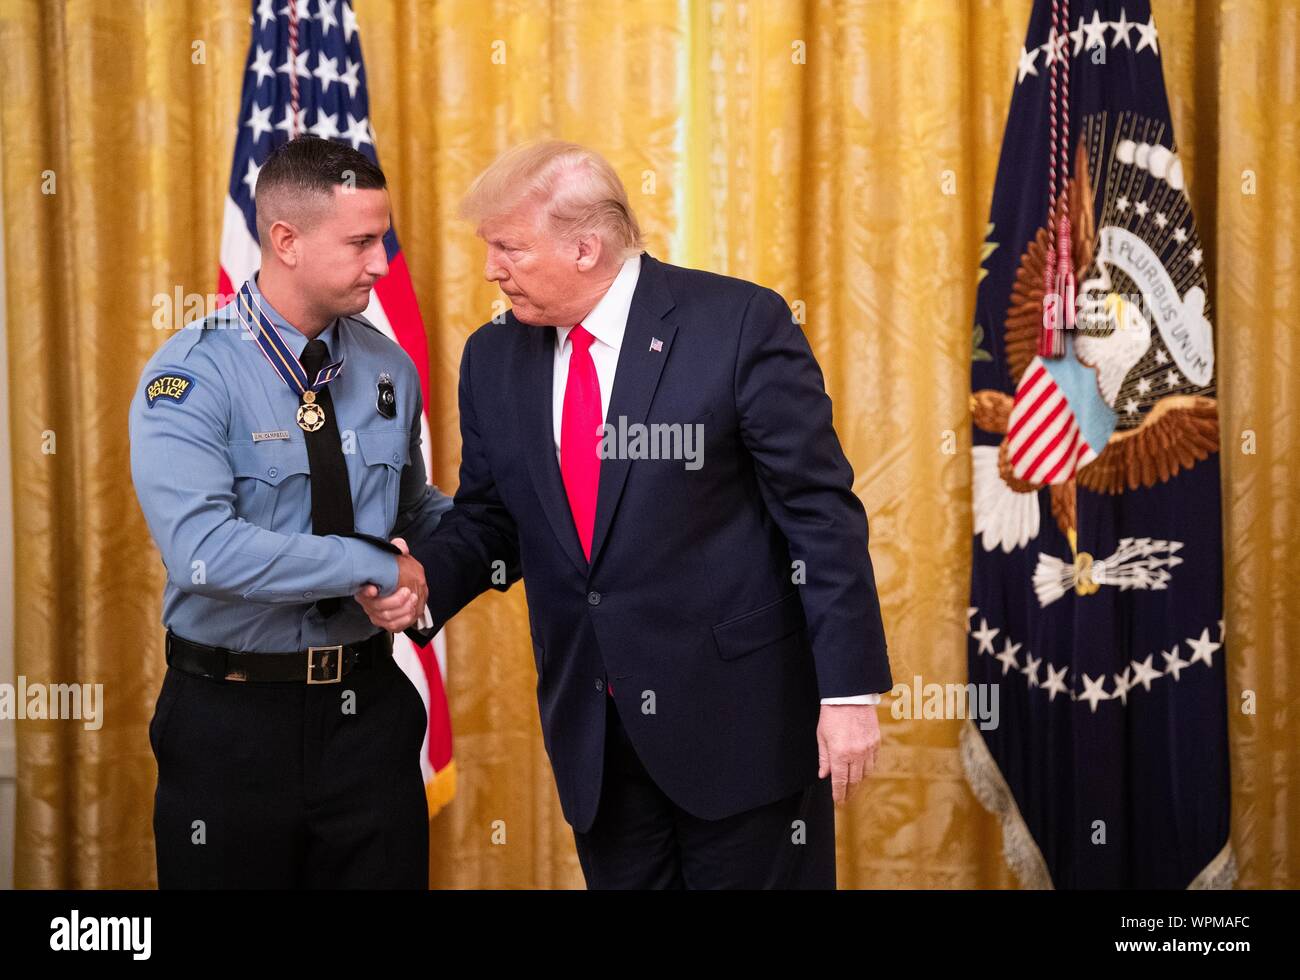 Washington, United States. 09th Sep, 2019. President Donald Trump awards Dayton Police Officer Jeremy Campbell the Public Safety Officer Medal of Valor, during a ceremony in the East Room at the White House in Washington, DC on Monday, September 9, 2019. Trump recognized the six Dayton officers who stoped a mass shooting on August 4th and honored 5 civilians who helped during a mass shooting at a Walmart in El Paso a day before. Photo by Kevin Dietsch/UPI Credit: UPI/Alamy Live News Stock Photo